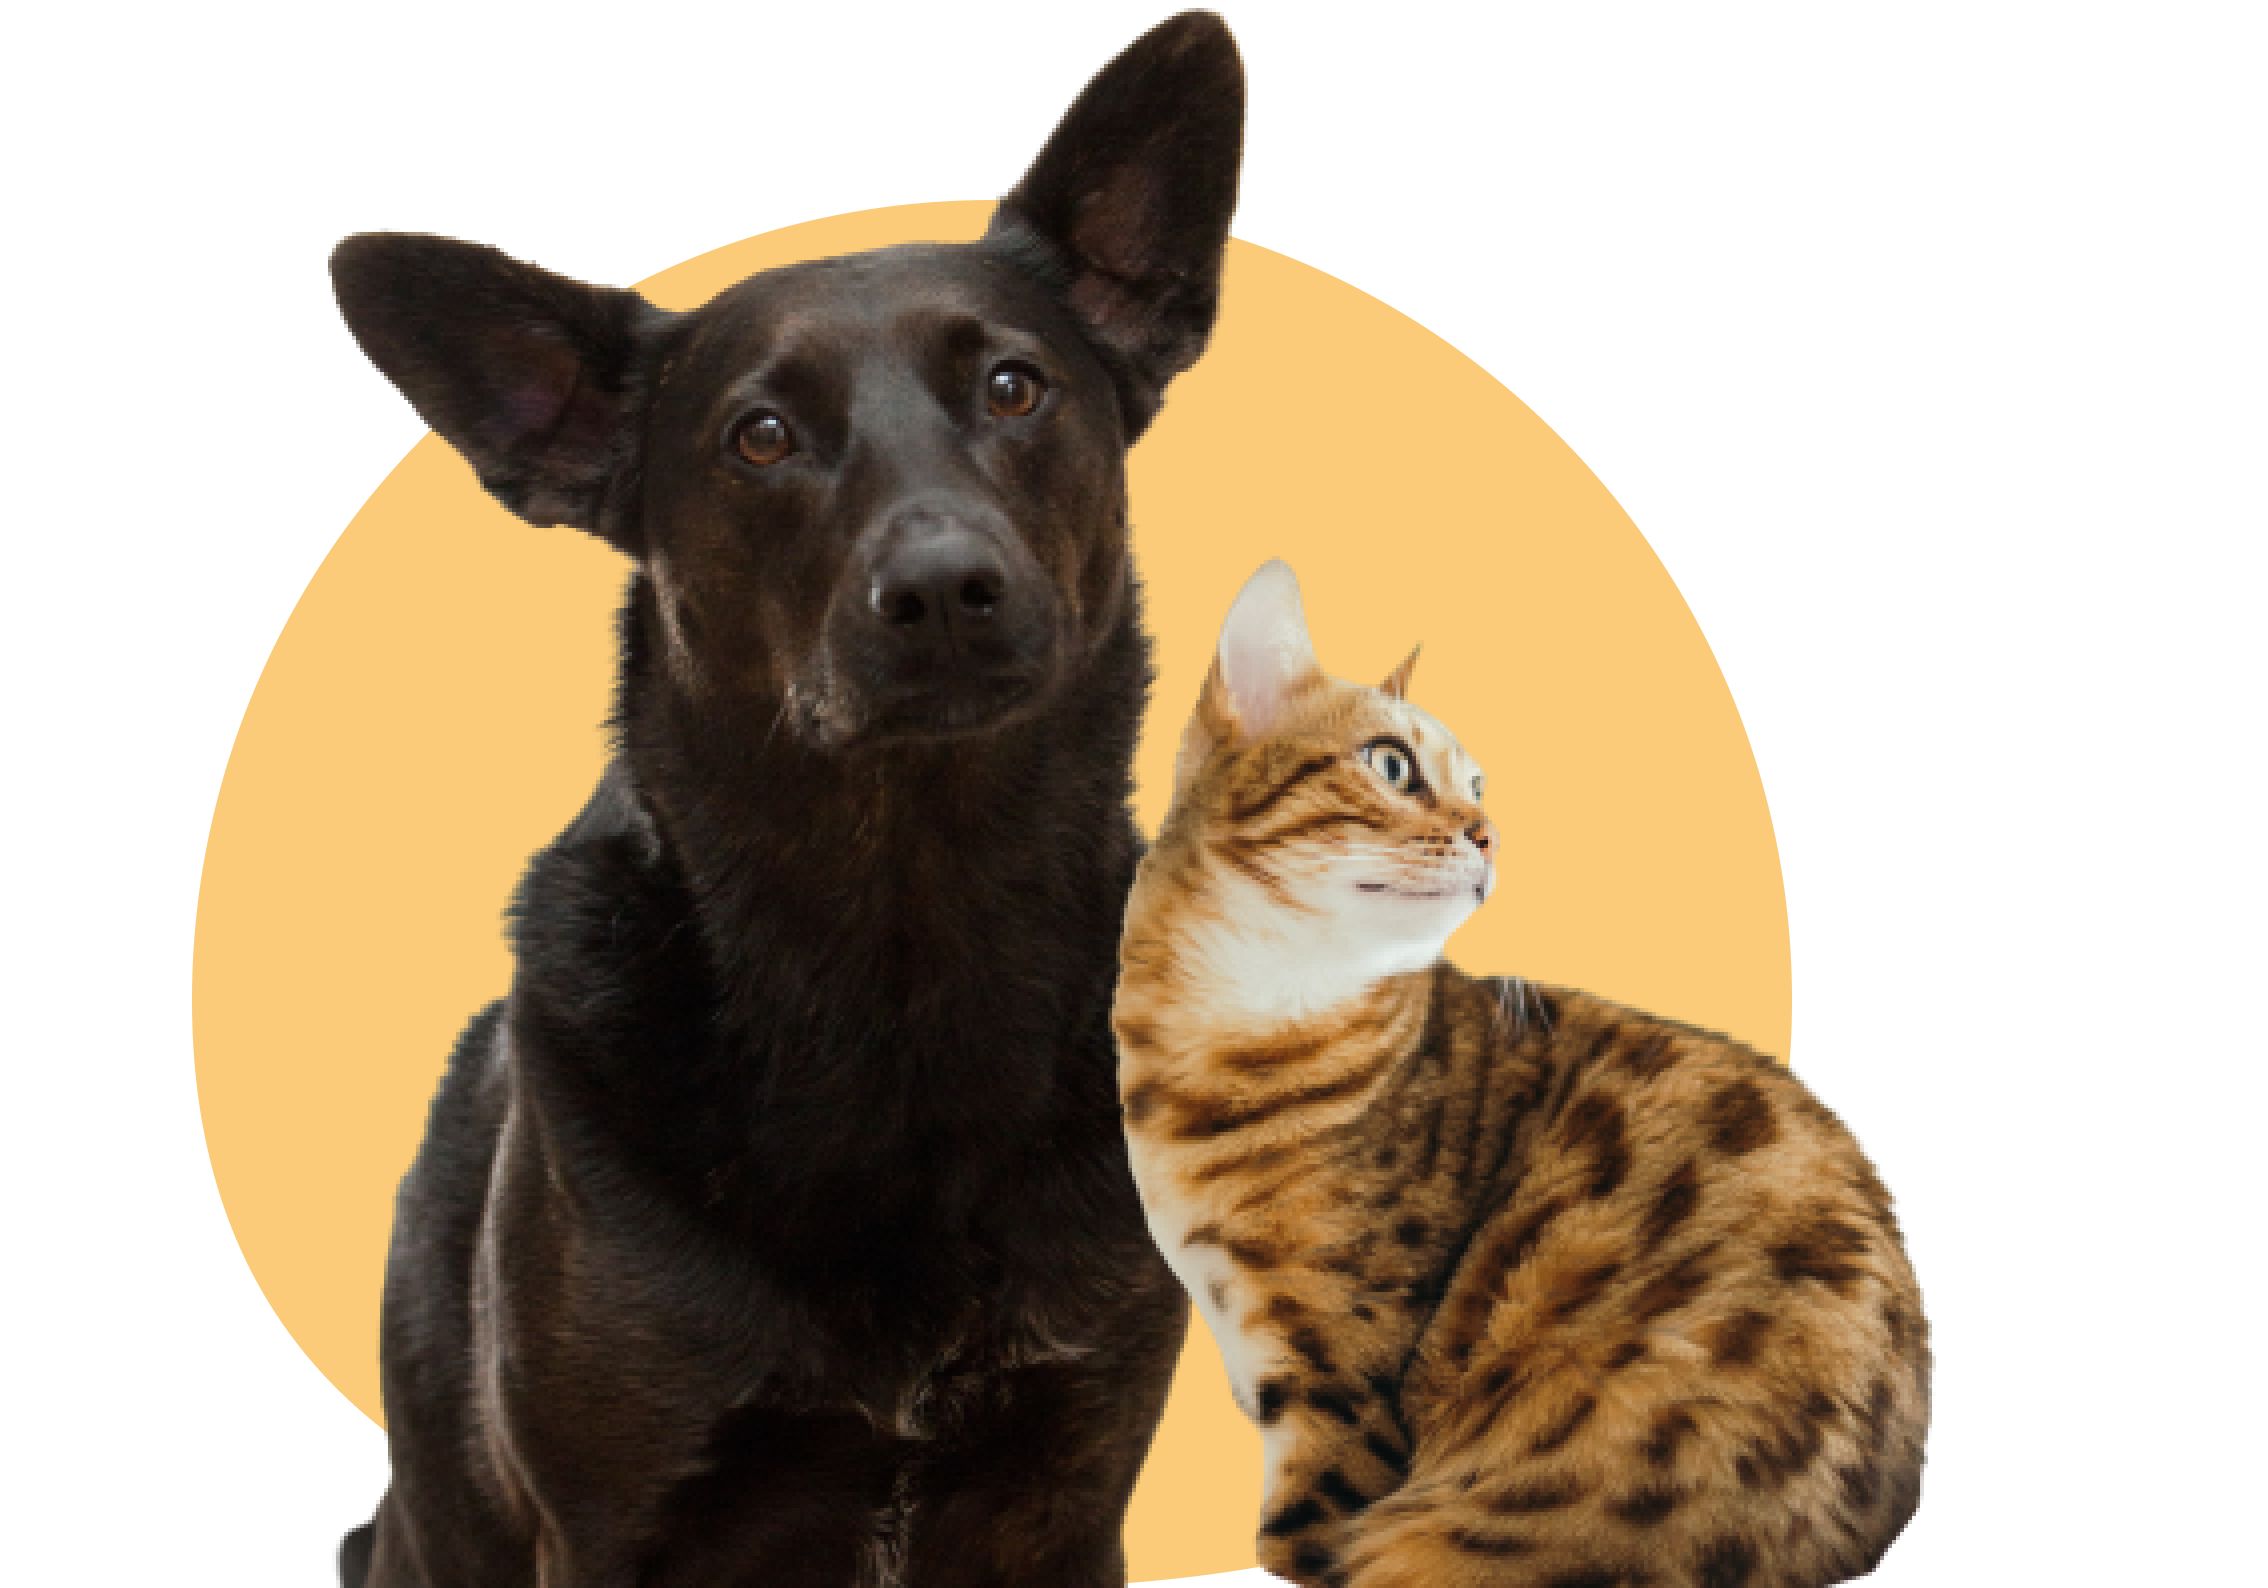 Cat and dog image with yellow background.